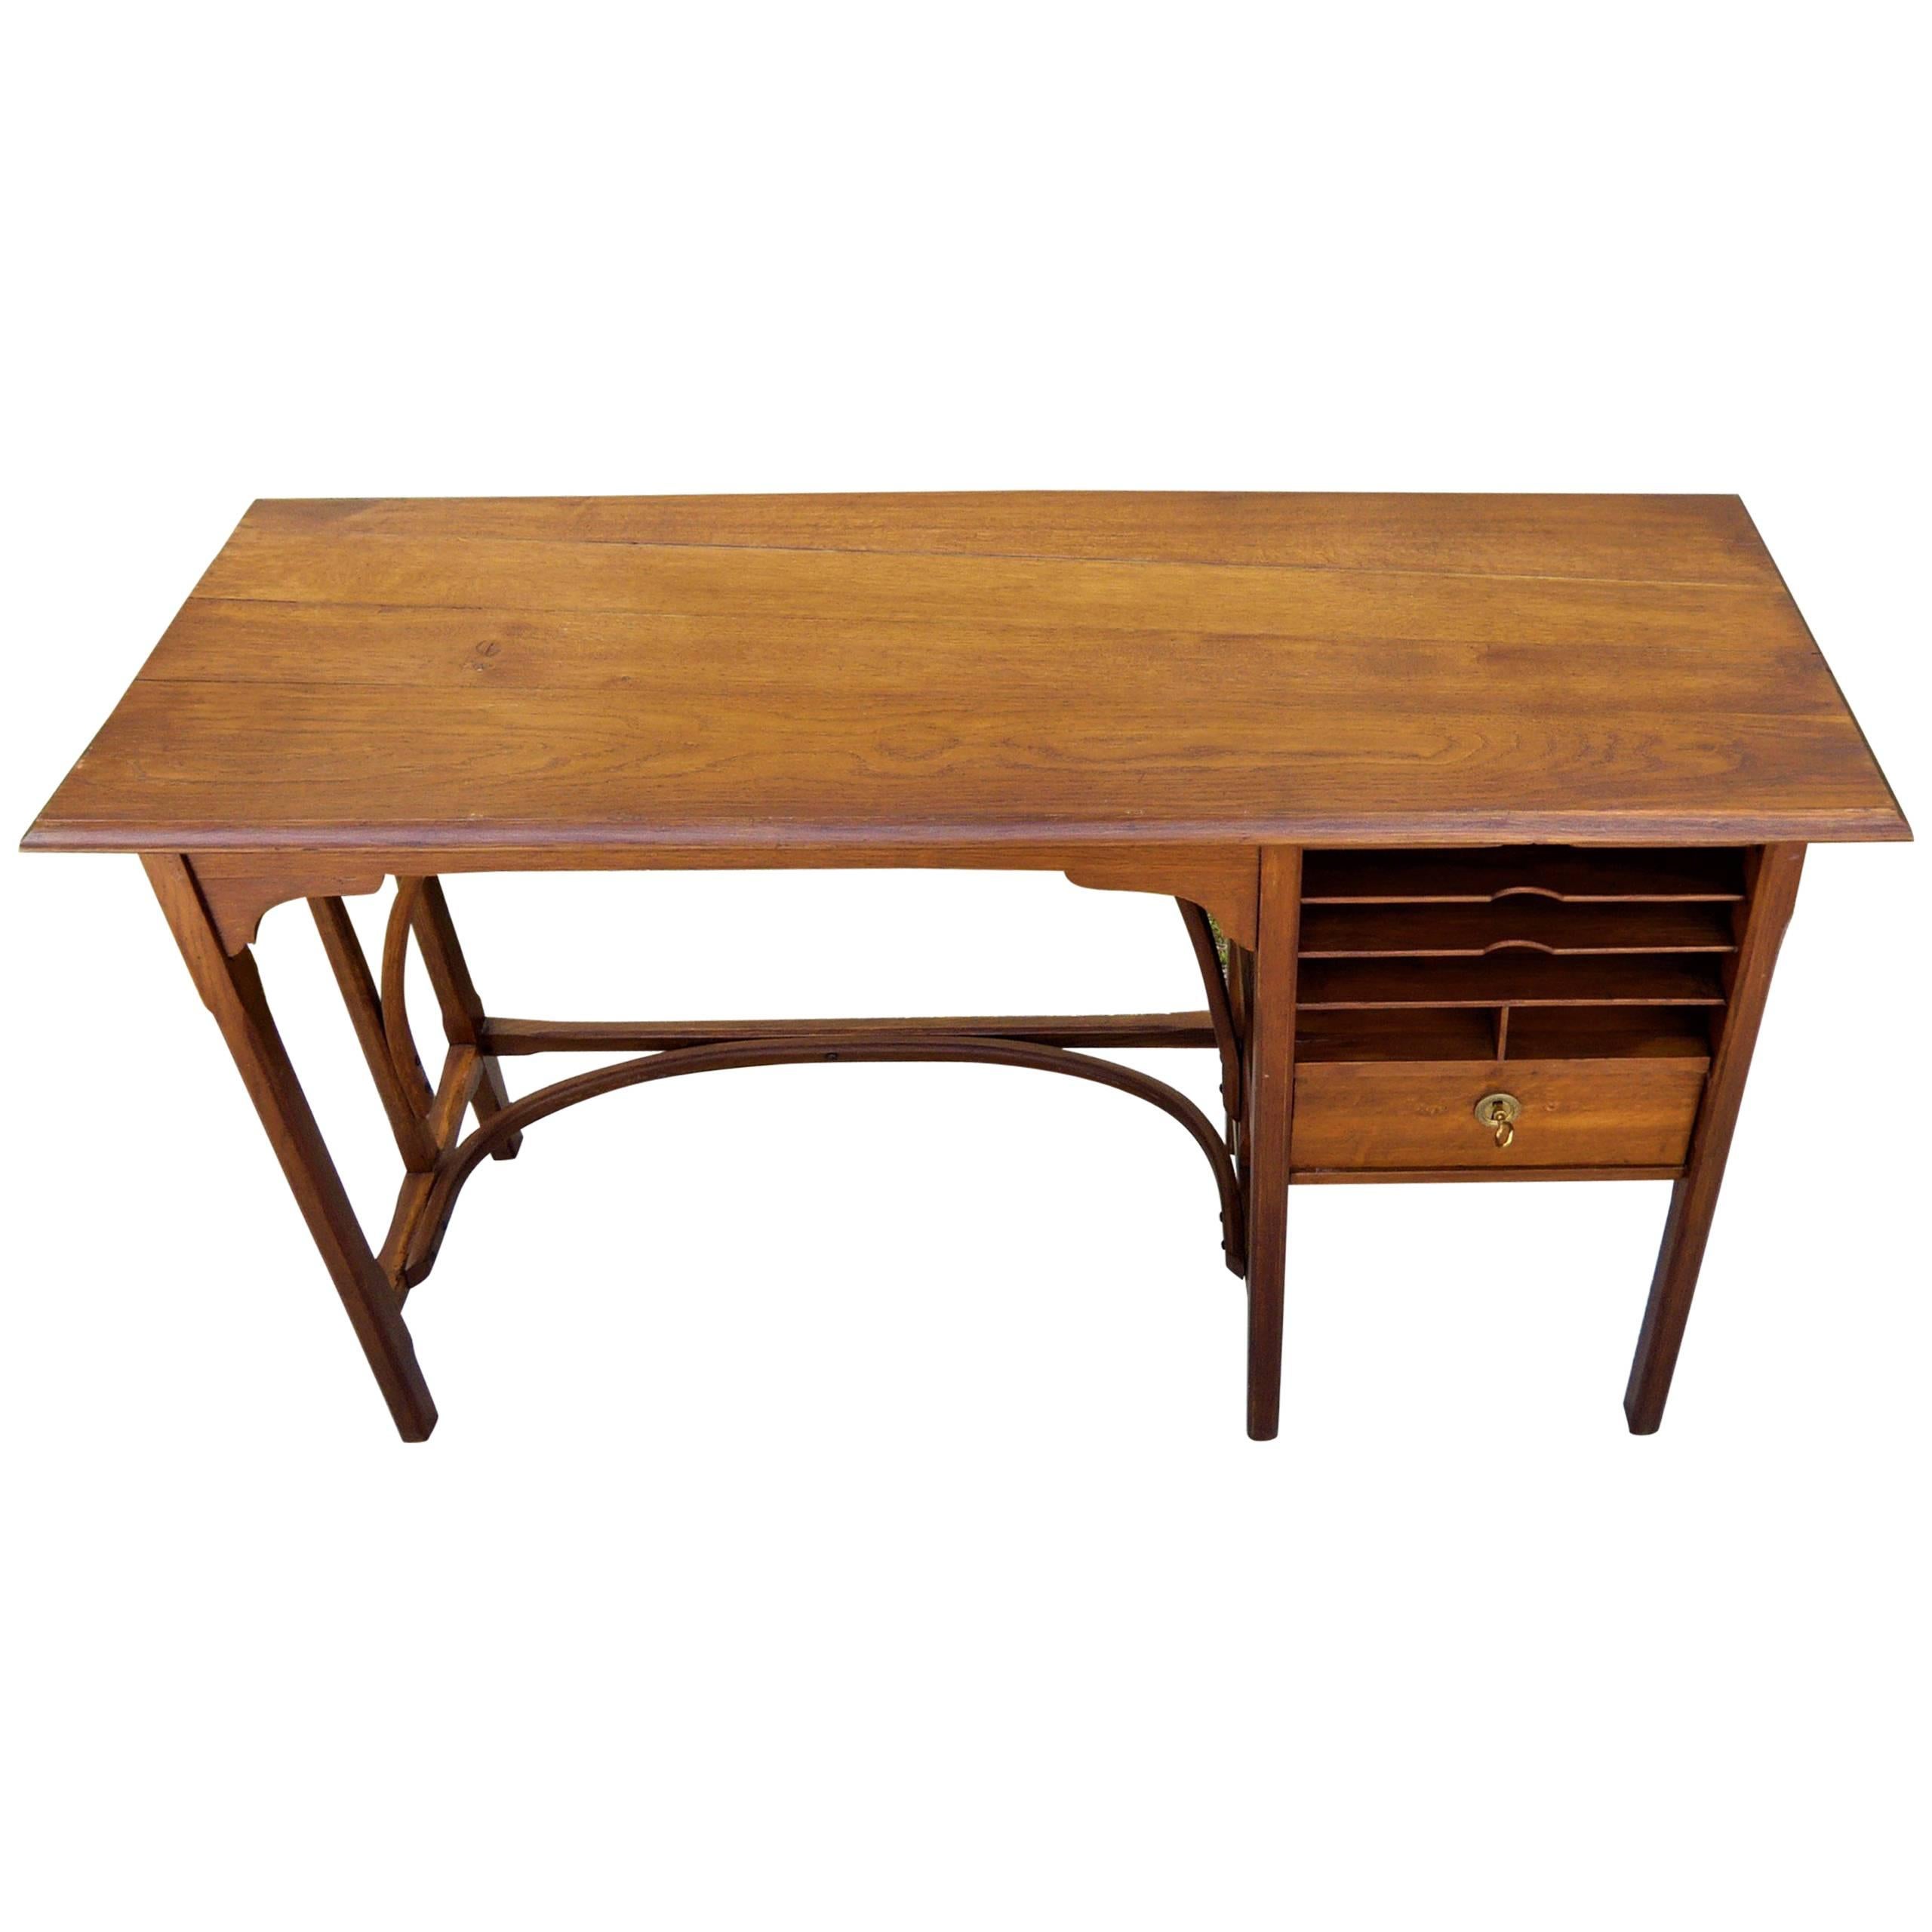 Thonet Bentwood Charming Writing Table Desk, 1900s